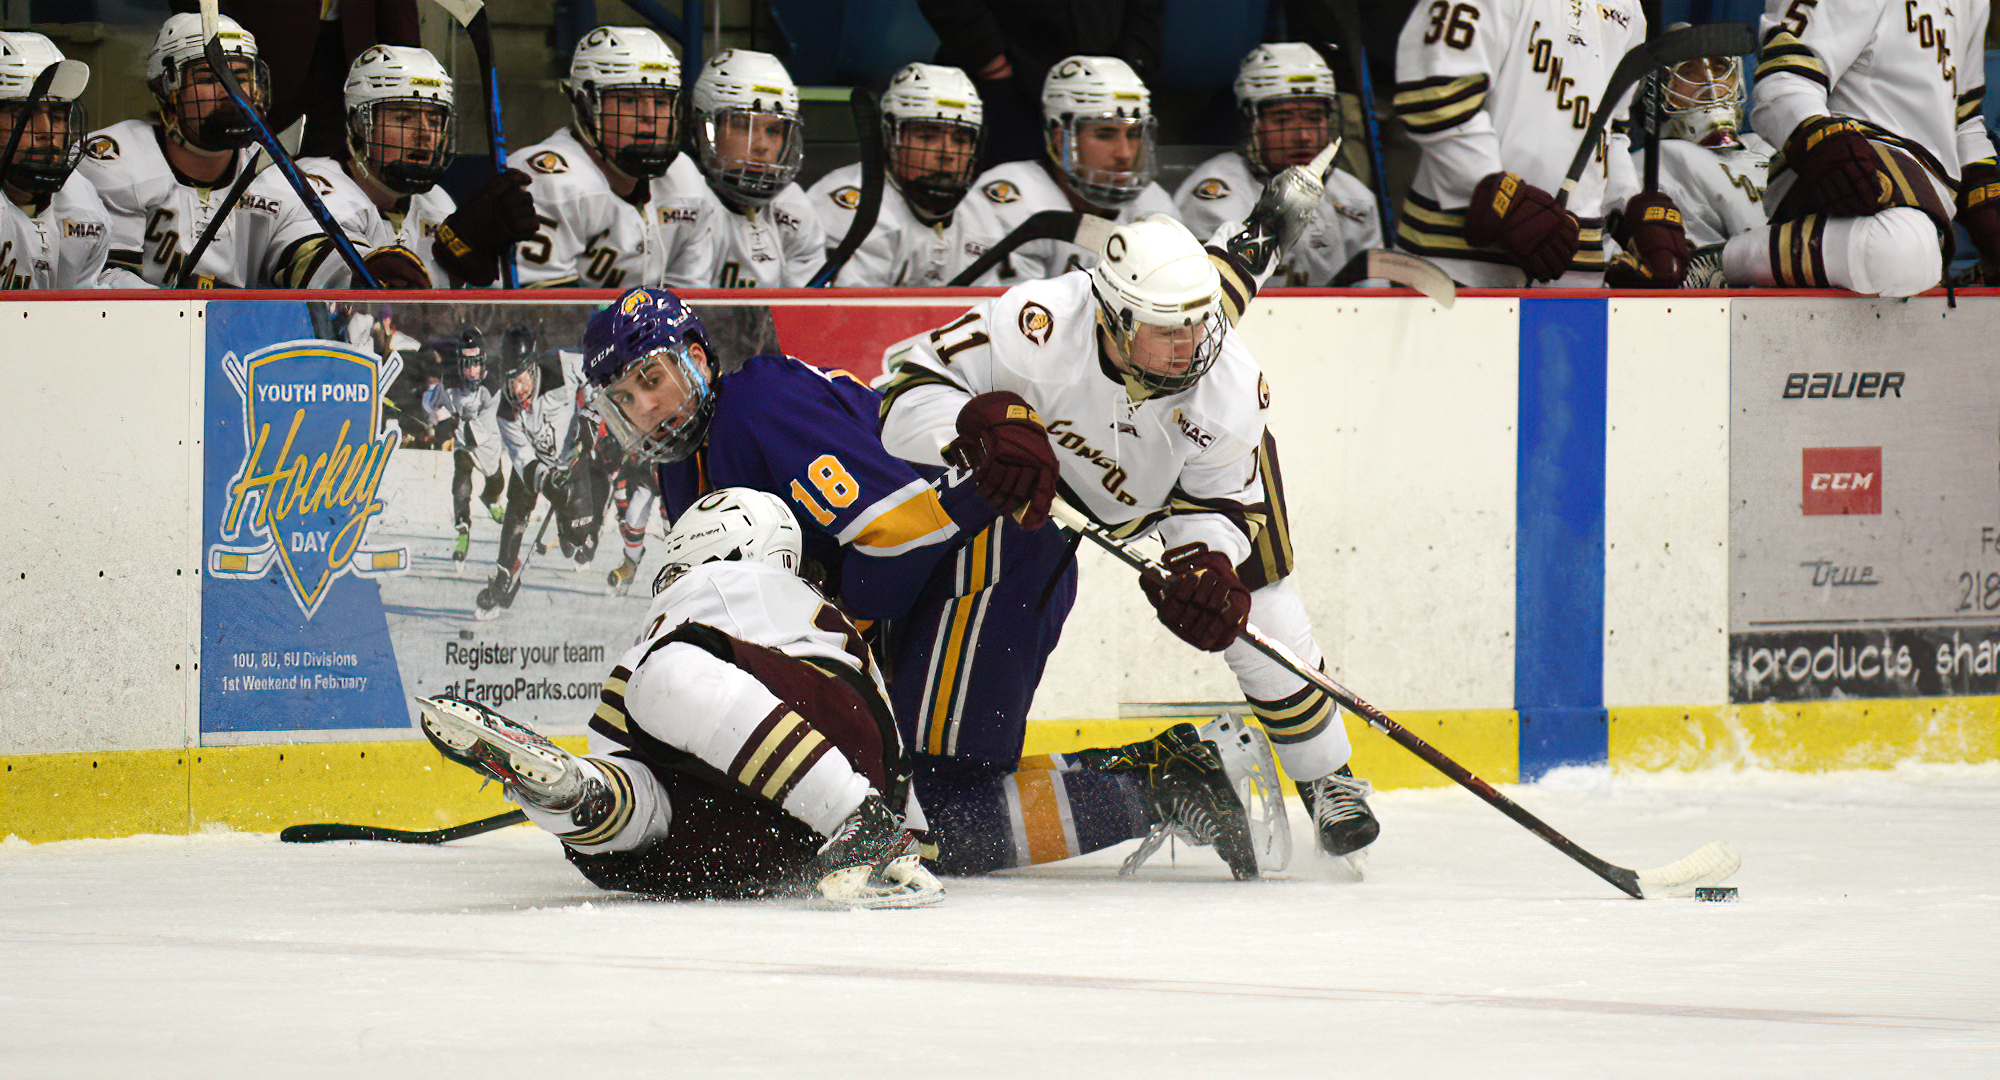 Jacen Bracko goes over a pair of bodies to gain control of the puck in the Cobbers' game with #10 UW-Stevens Pt. Bracko assisted on CC's first goal.